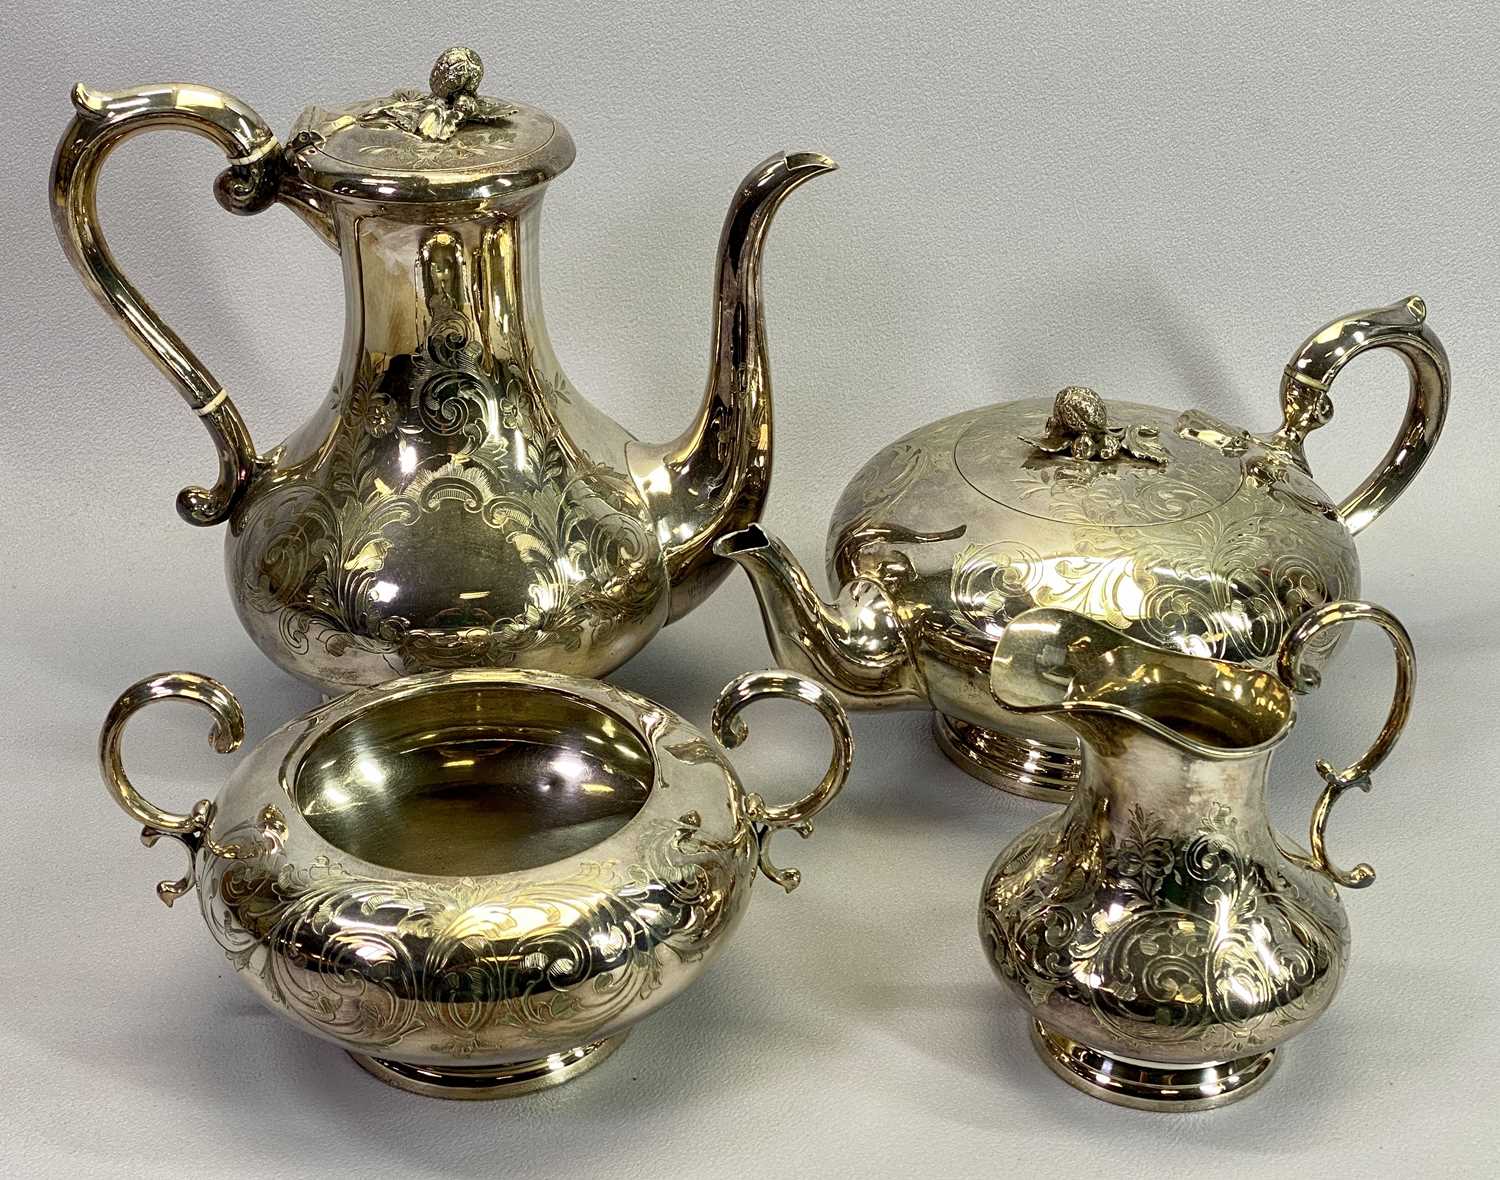 4 PIECE TEA SERVICE and other electroplate and metal items - Image 2 of 2